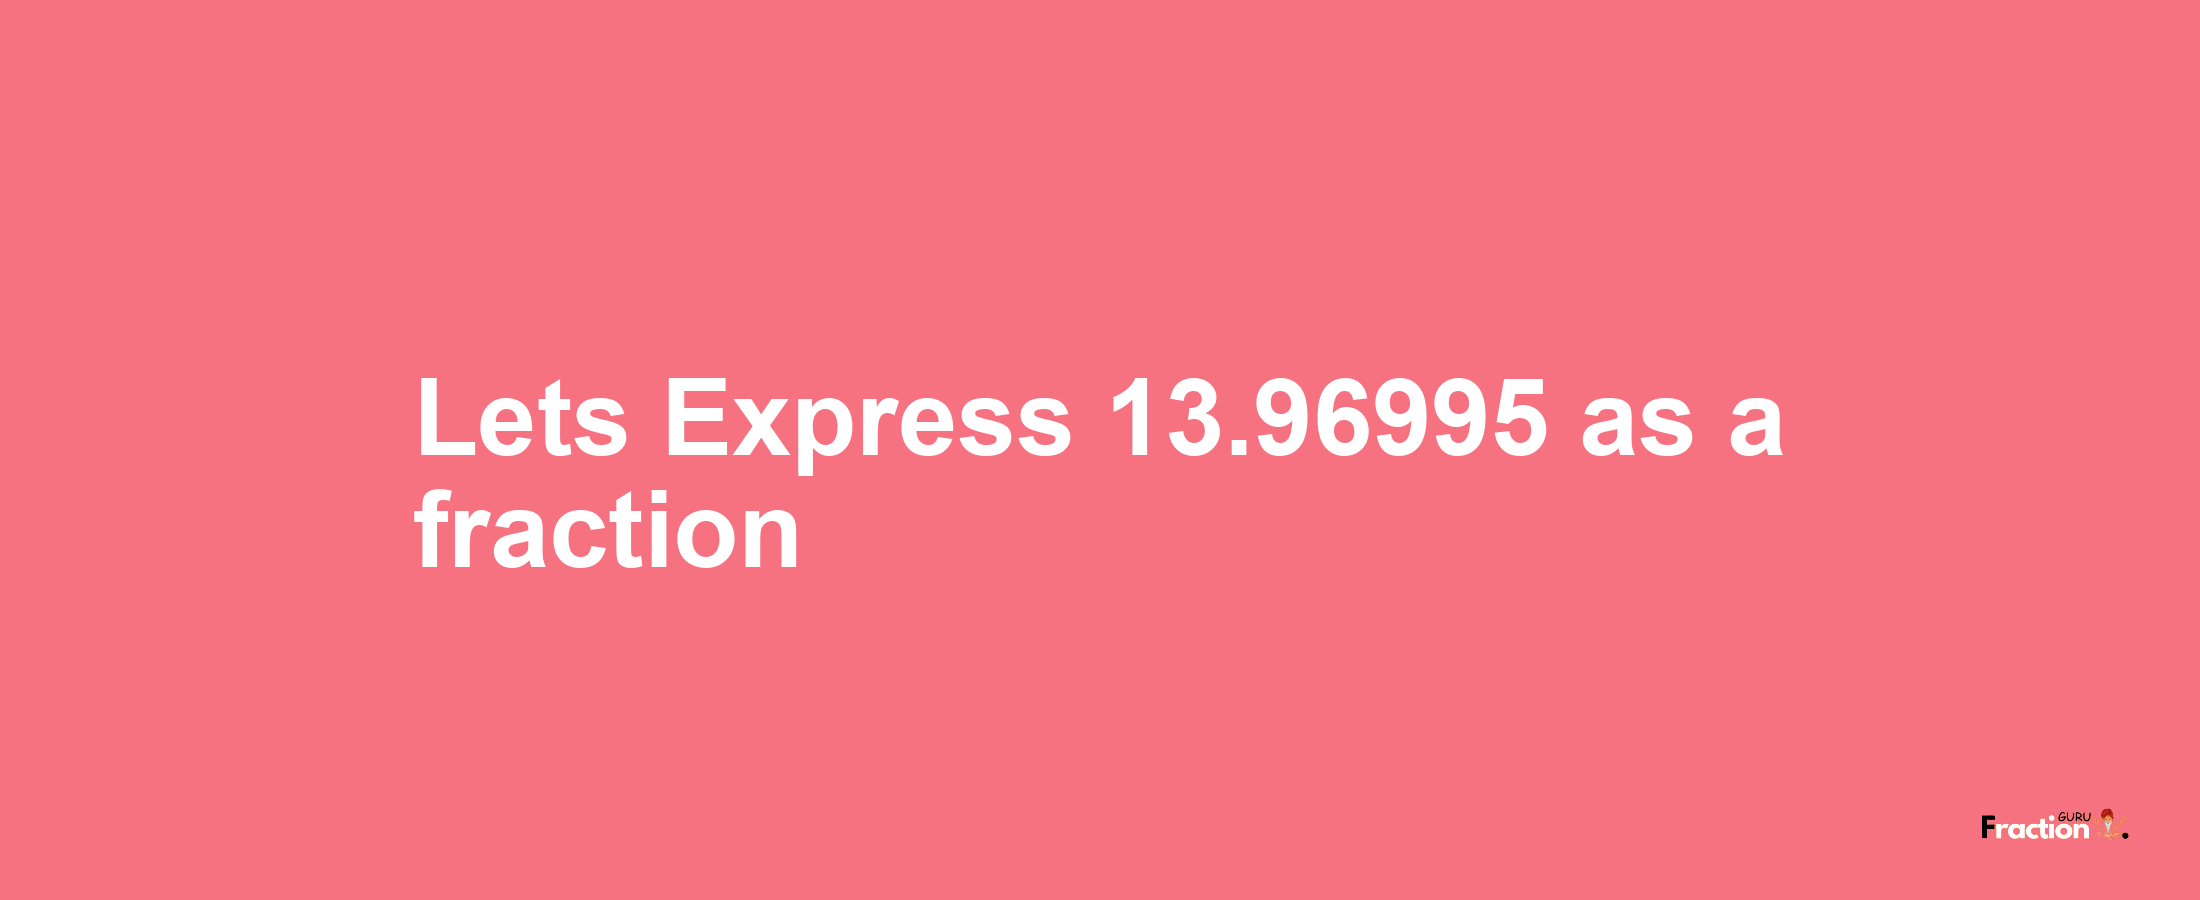 Lets Express 13.96995 as afraction